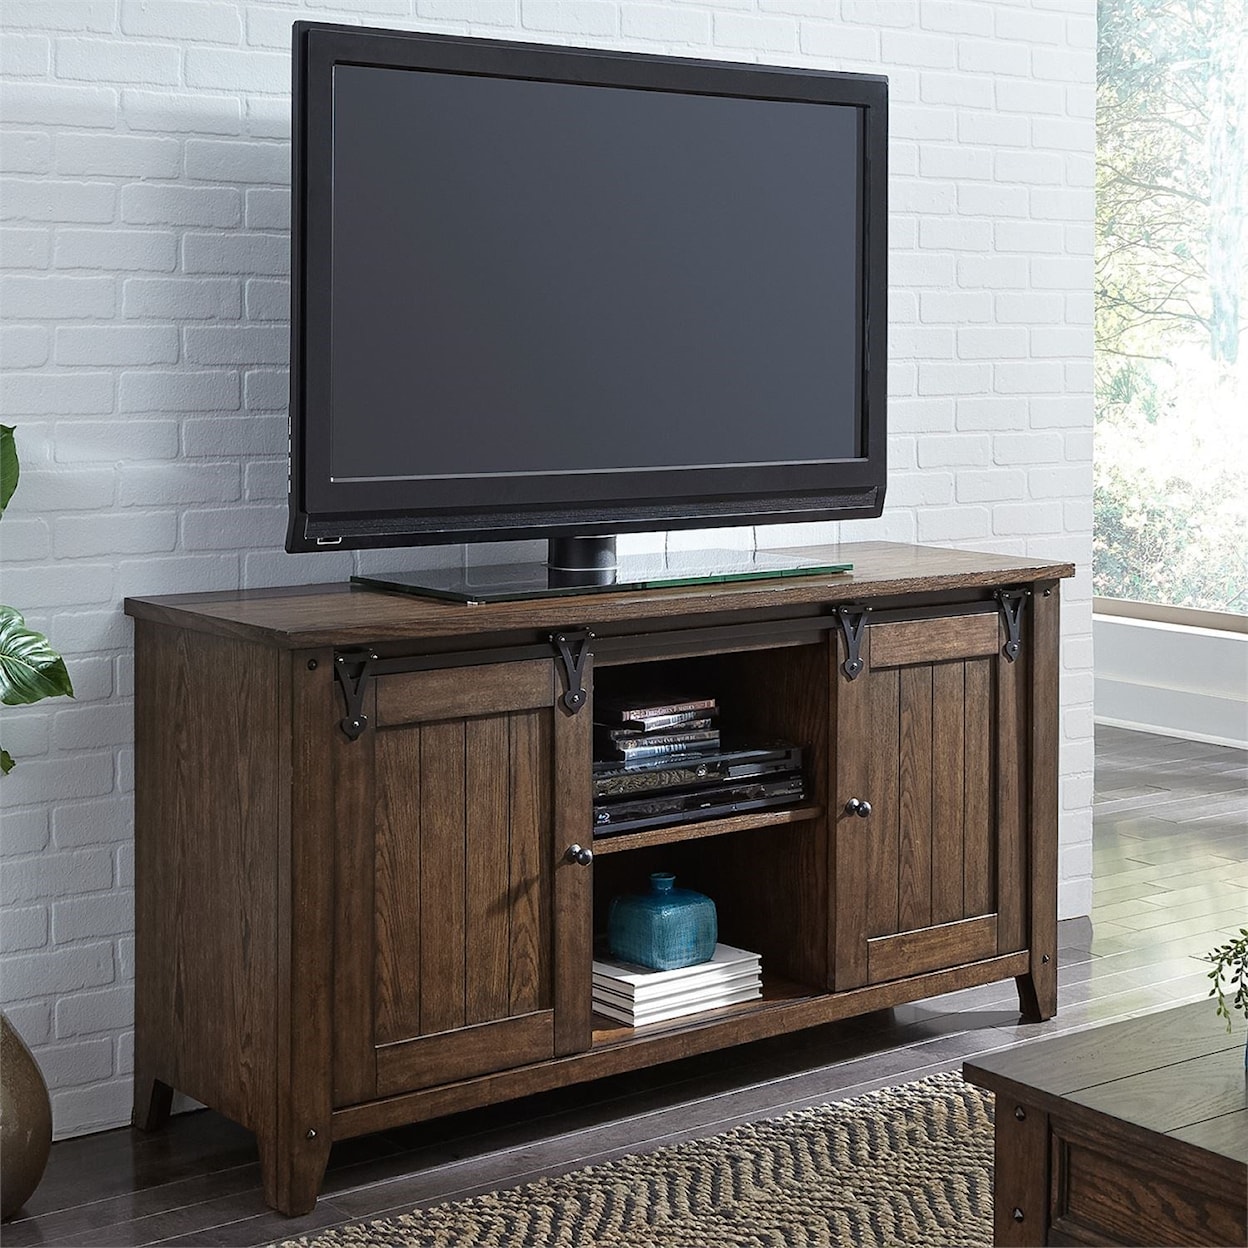 Libby Laney  TV Console